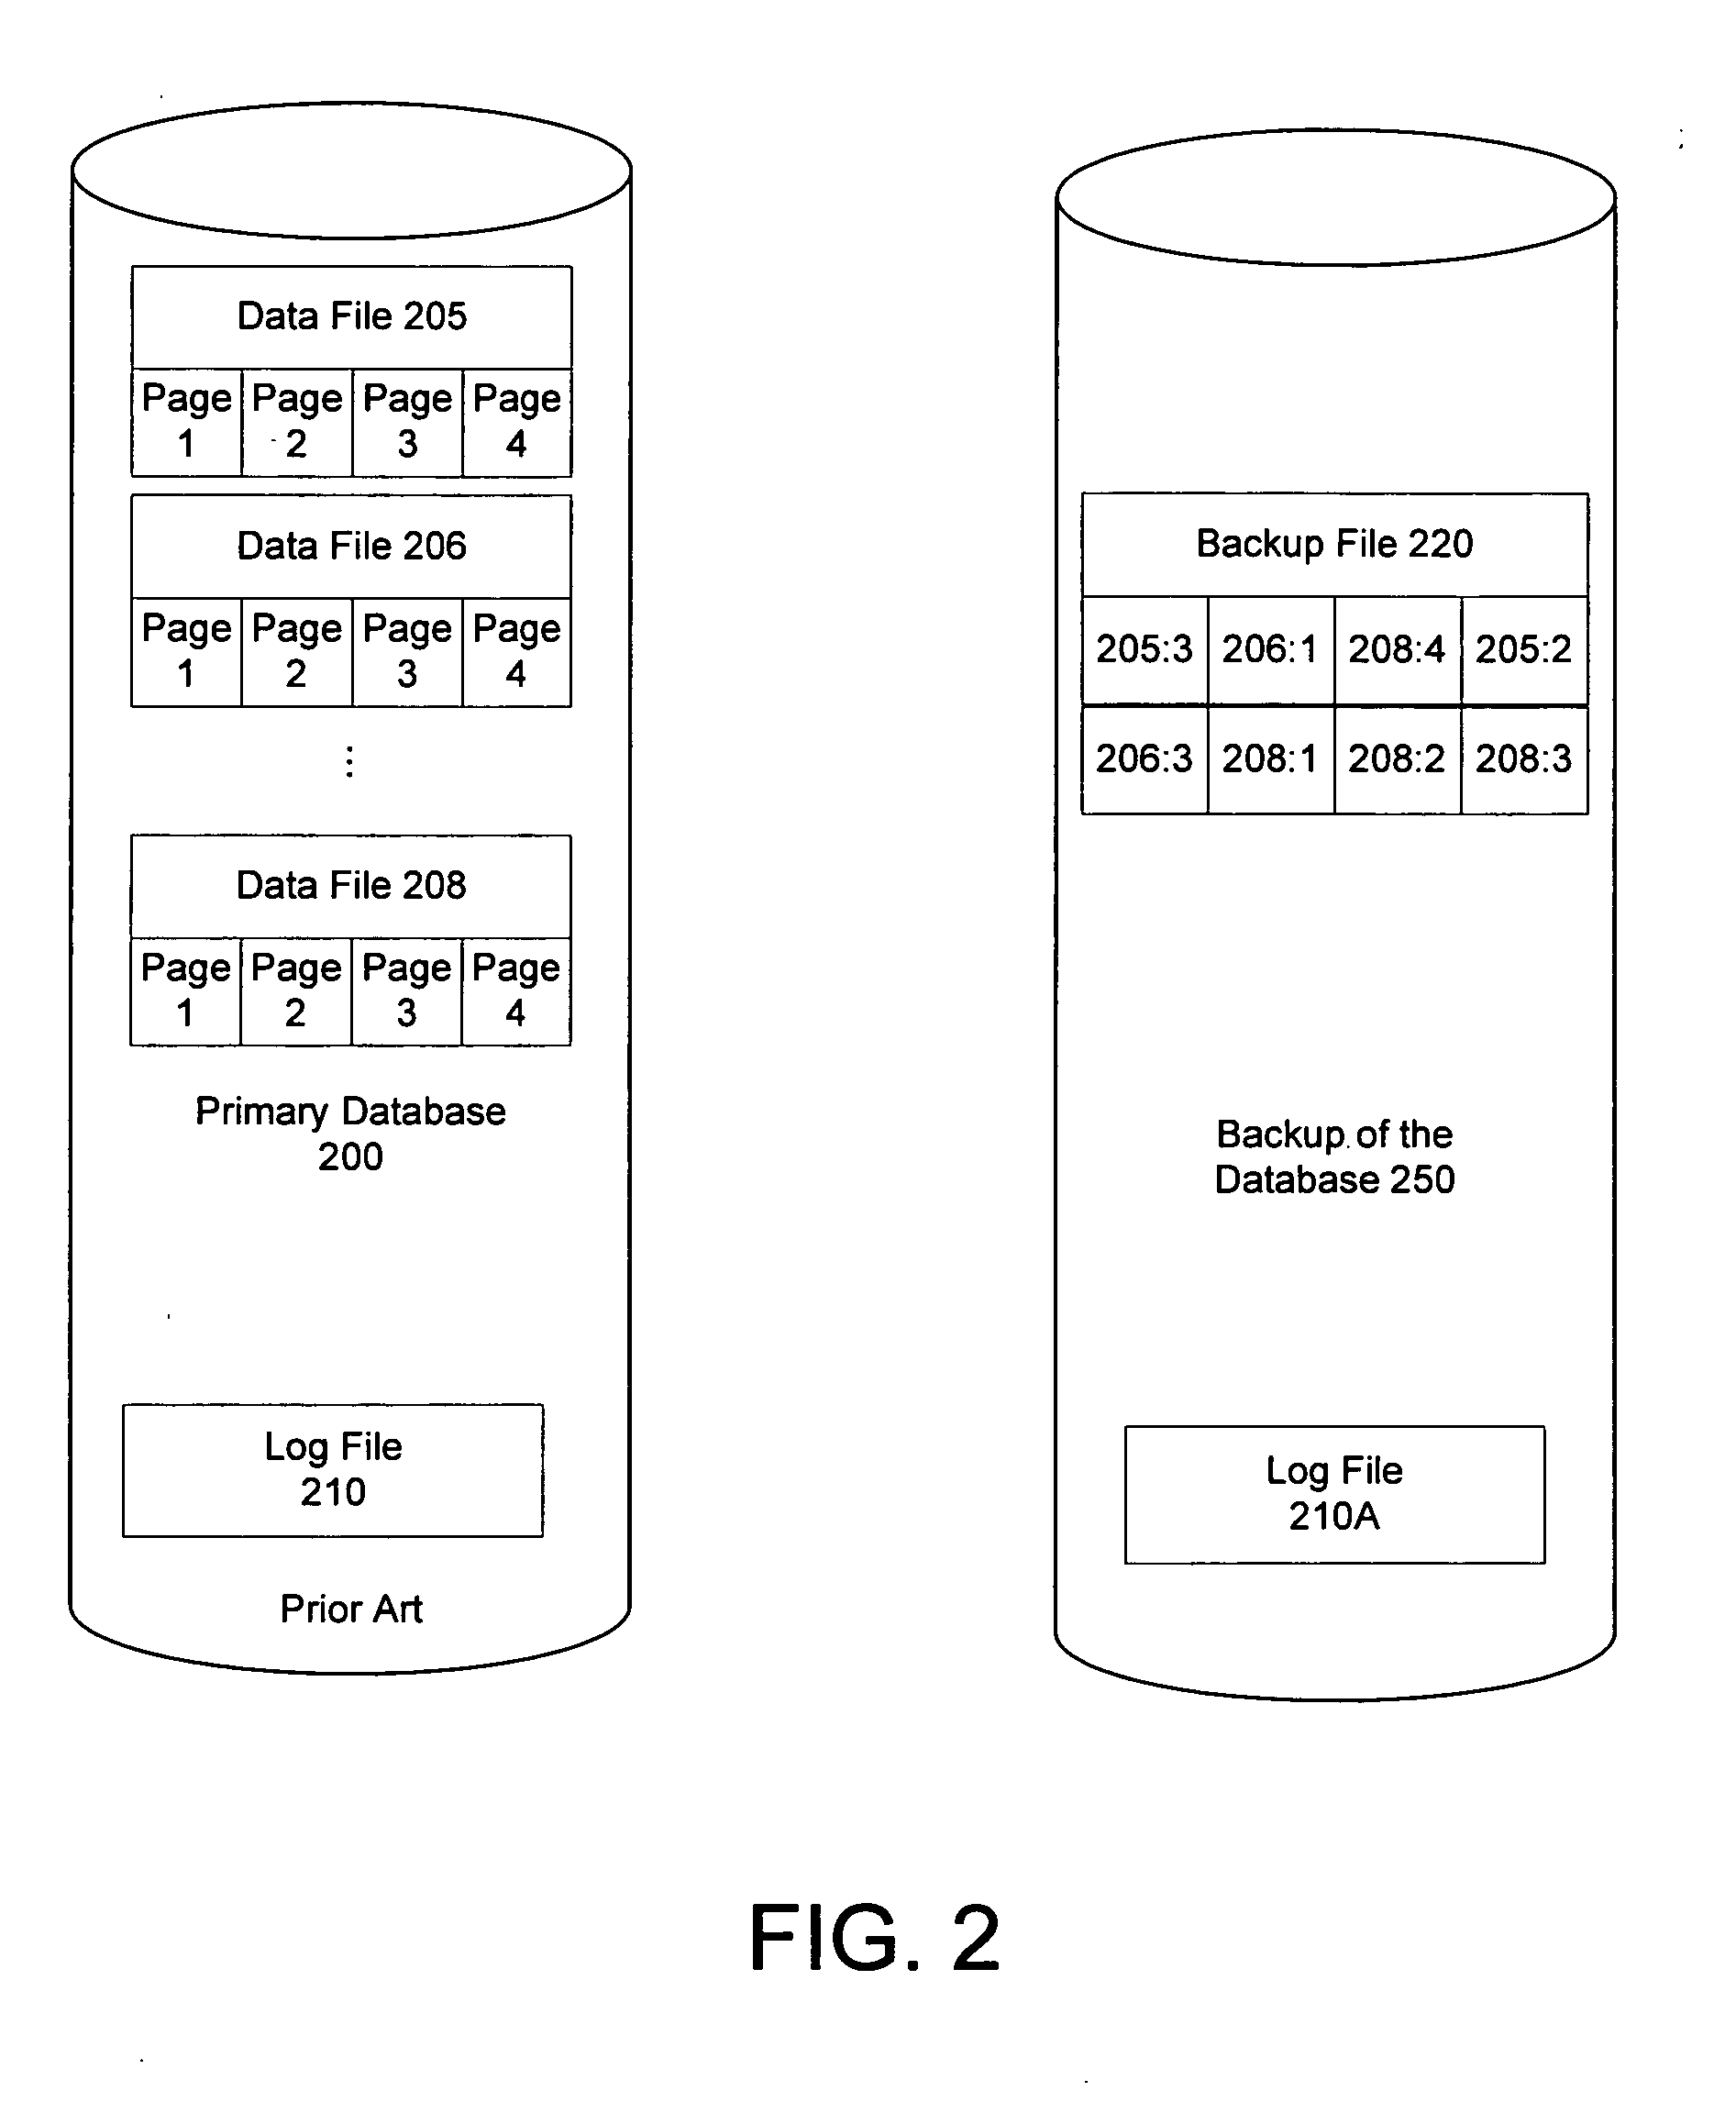 System and method for a consistency check of a database backup